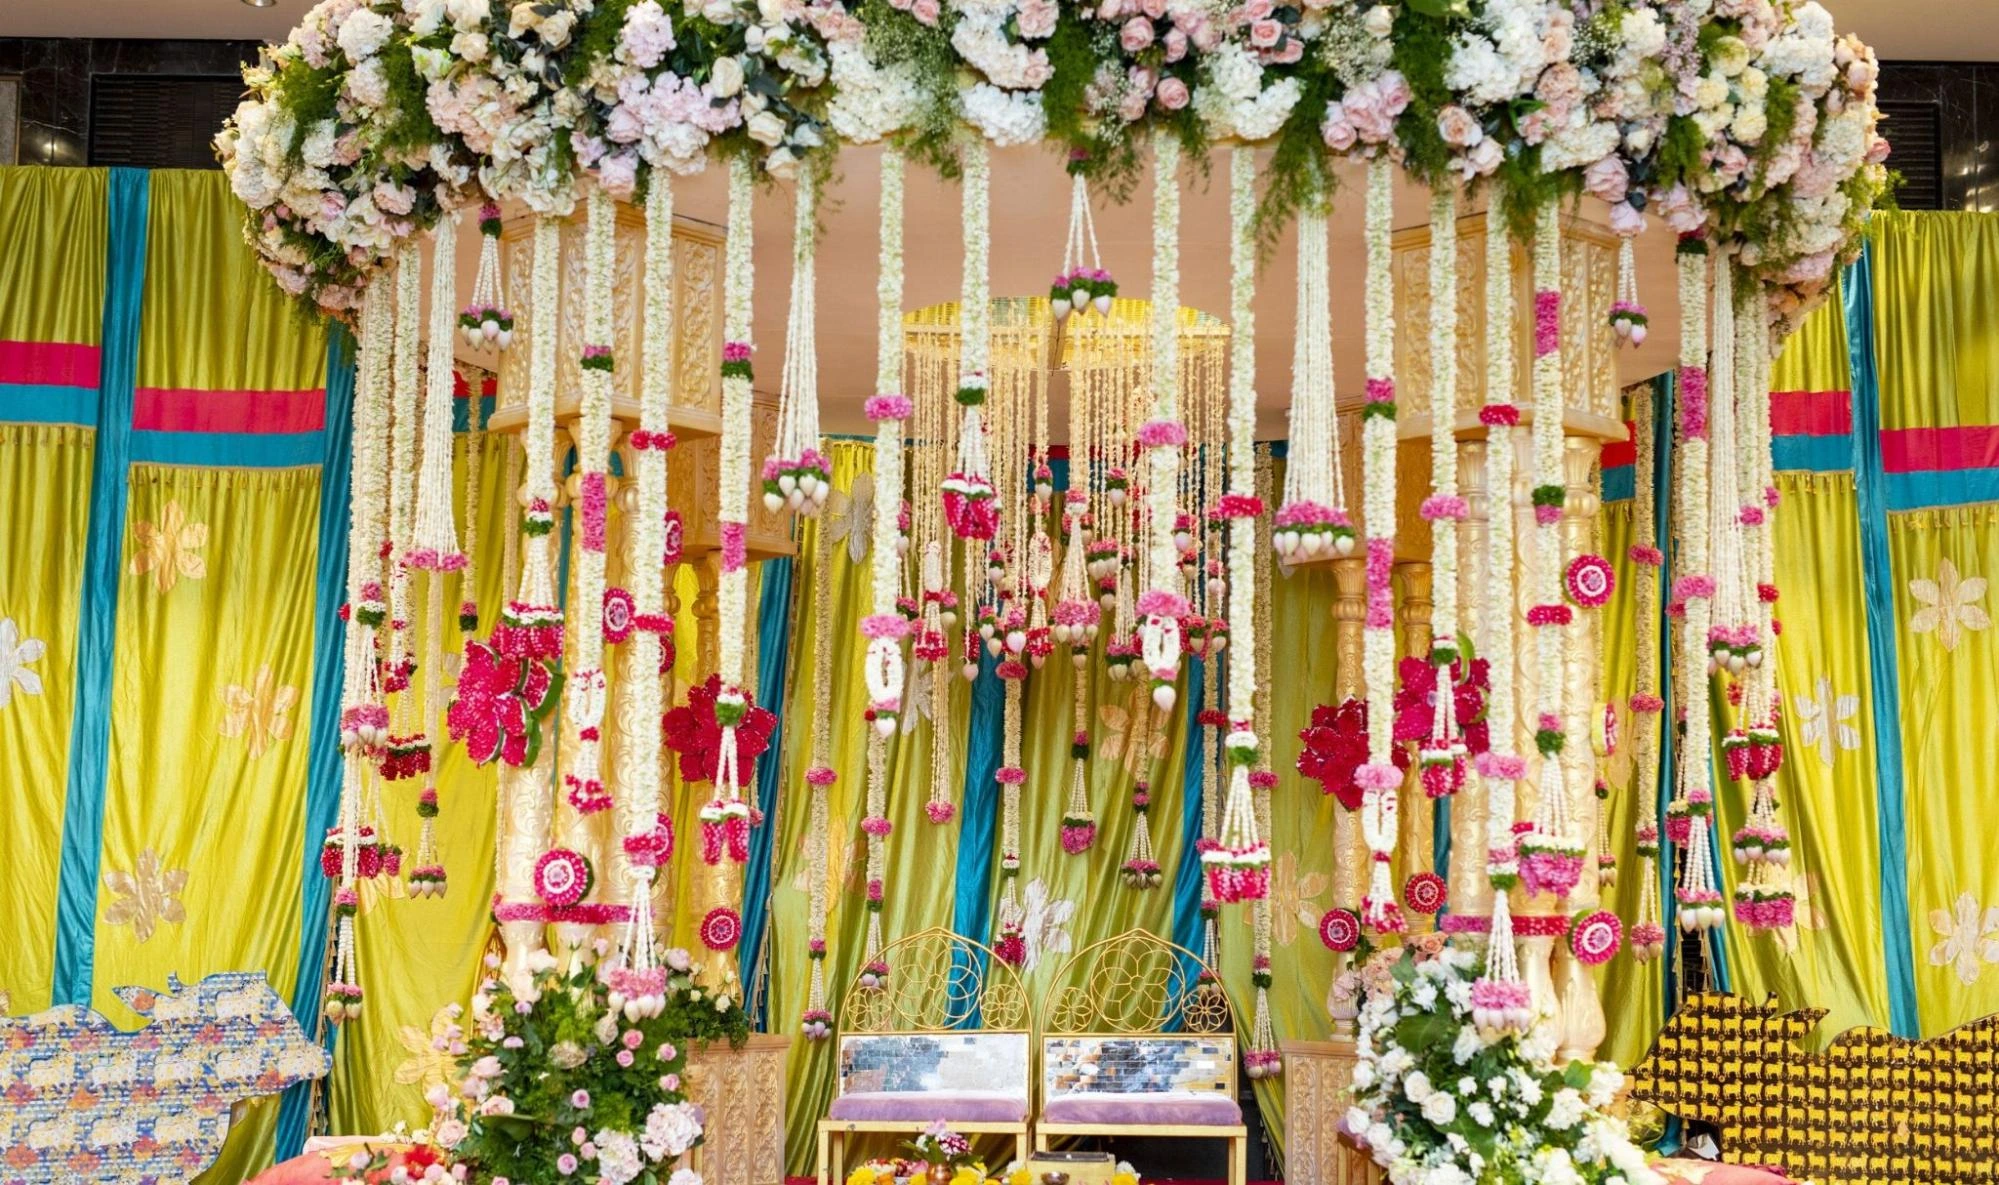 9 Overused Wedding Decor Trends That Have Lost Their Sparkle